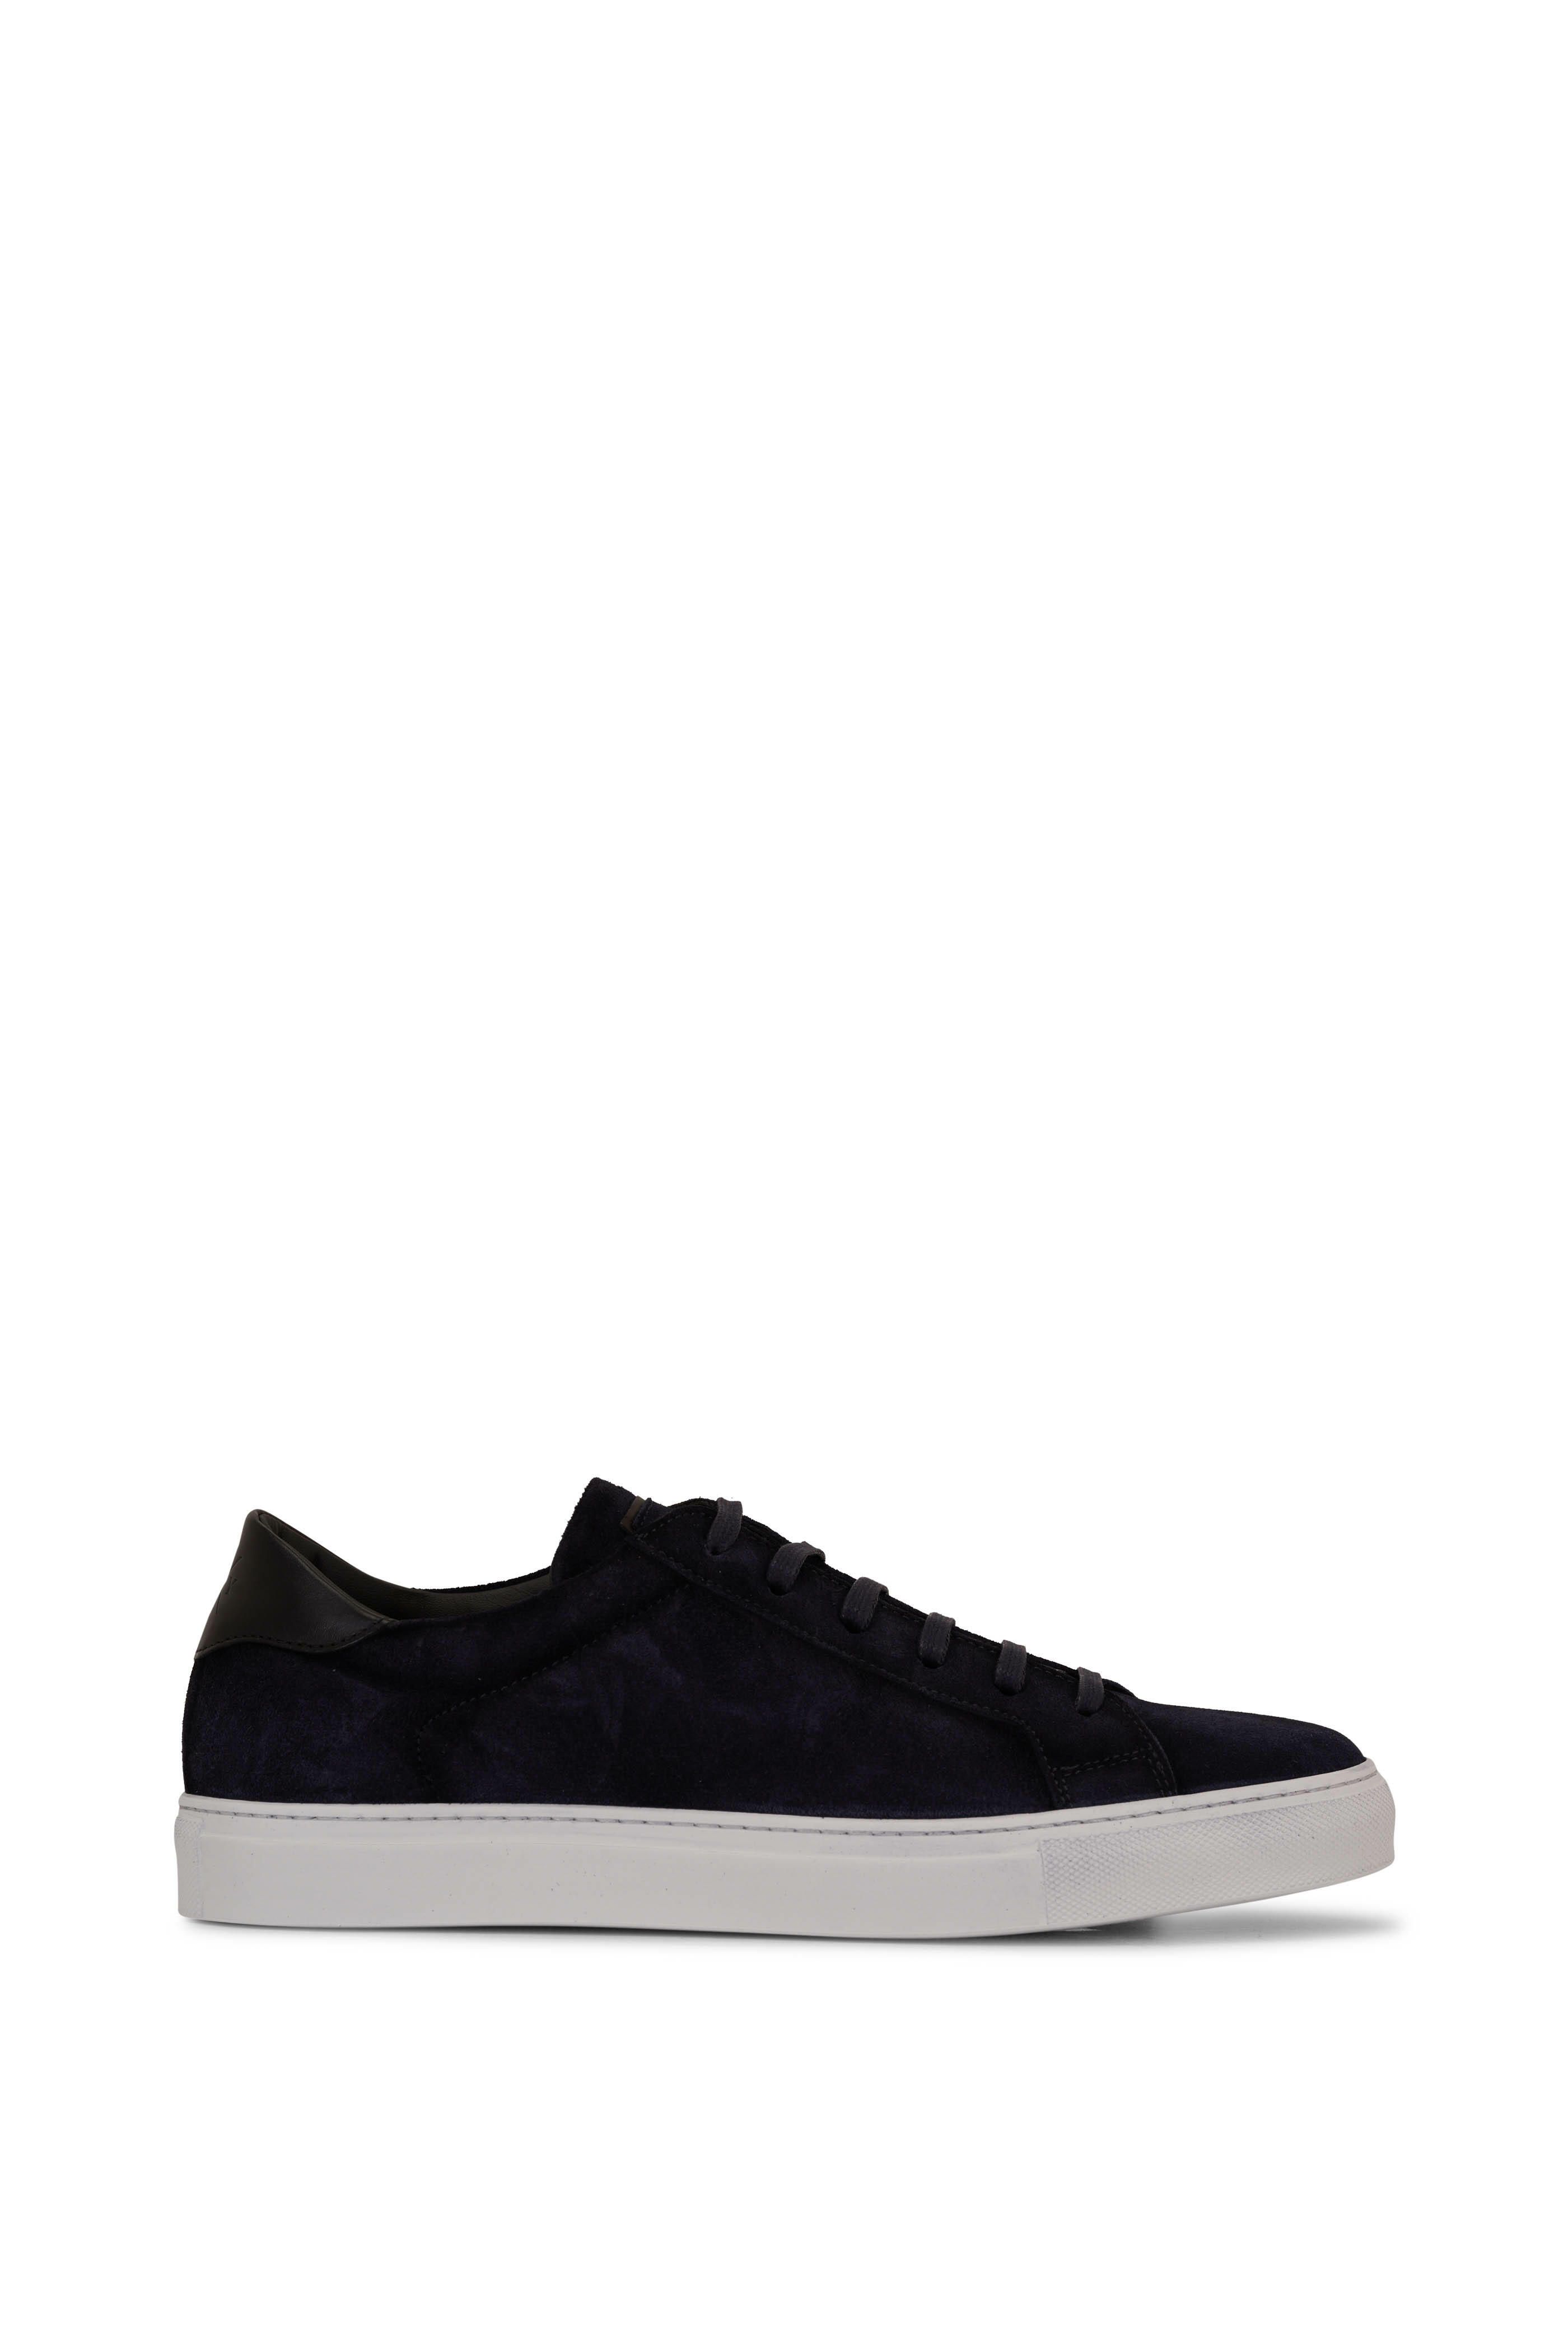 To Boot New York - Derrick Navy Suede Sneaker | Mitchell Stores